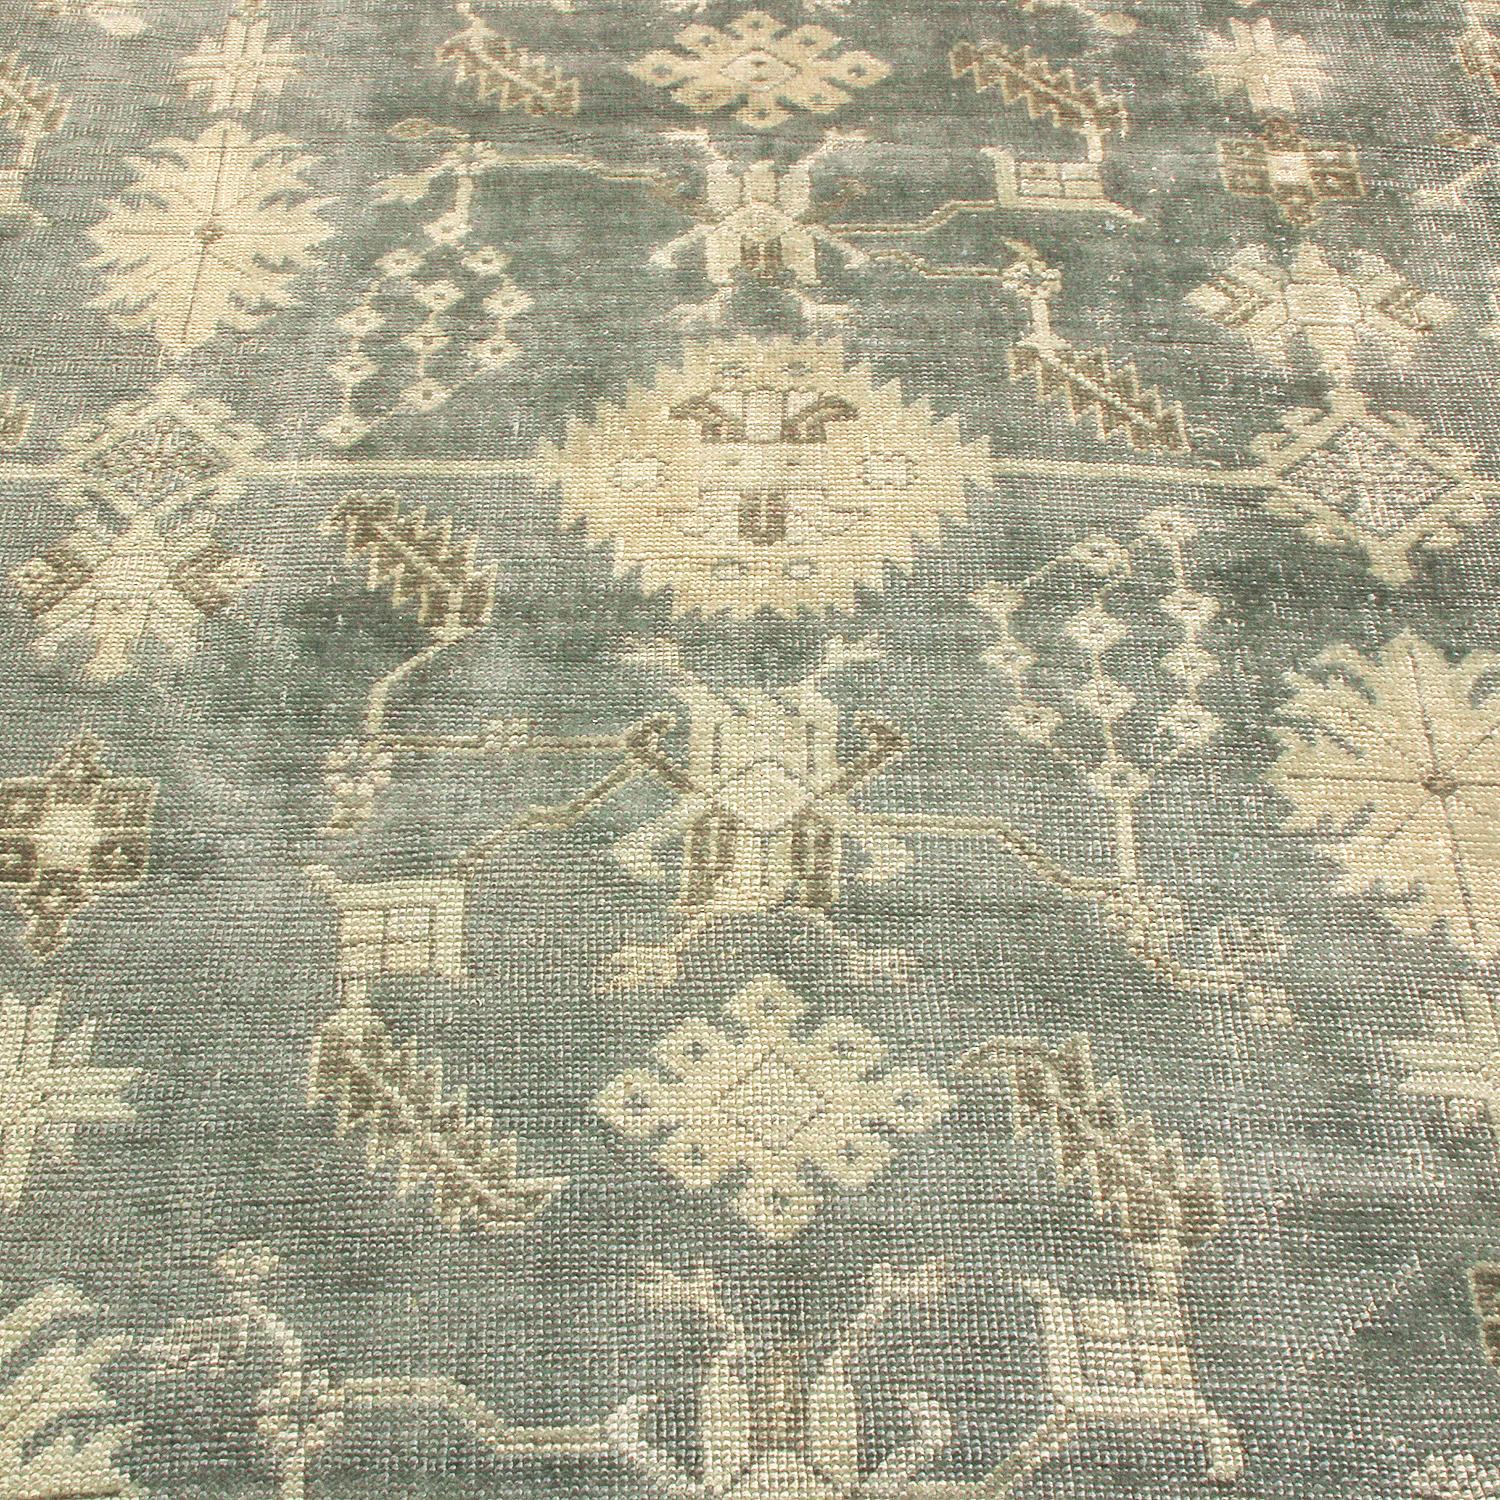 Hand knotted in Turkey originating between 1870-1880, this antique Oushak wool rug features a distinguished, rare colorway of stone blue with notes of tan and grey in the field and border, presenting an entirely unique presentation of its classical